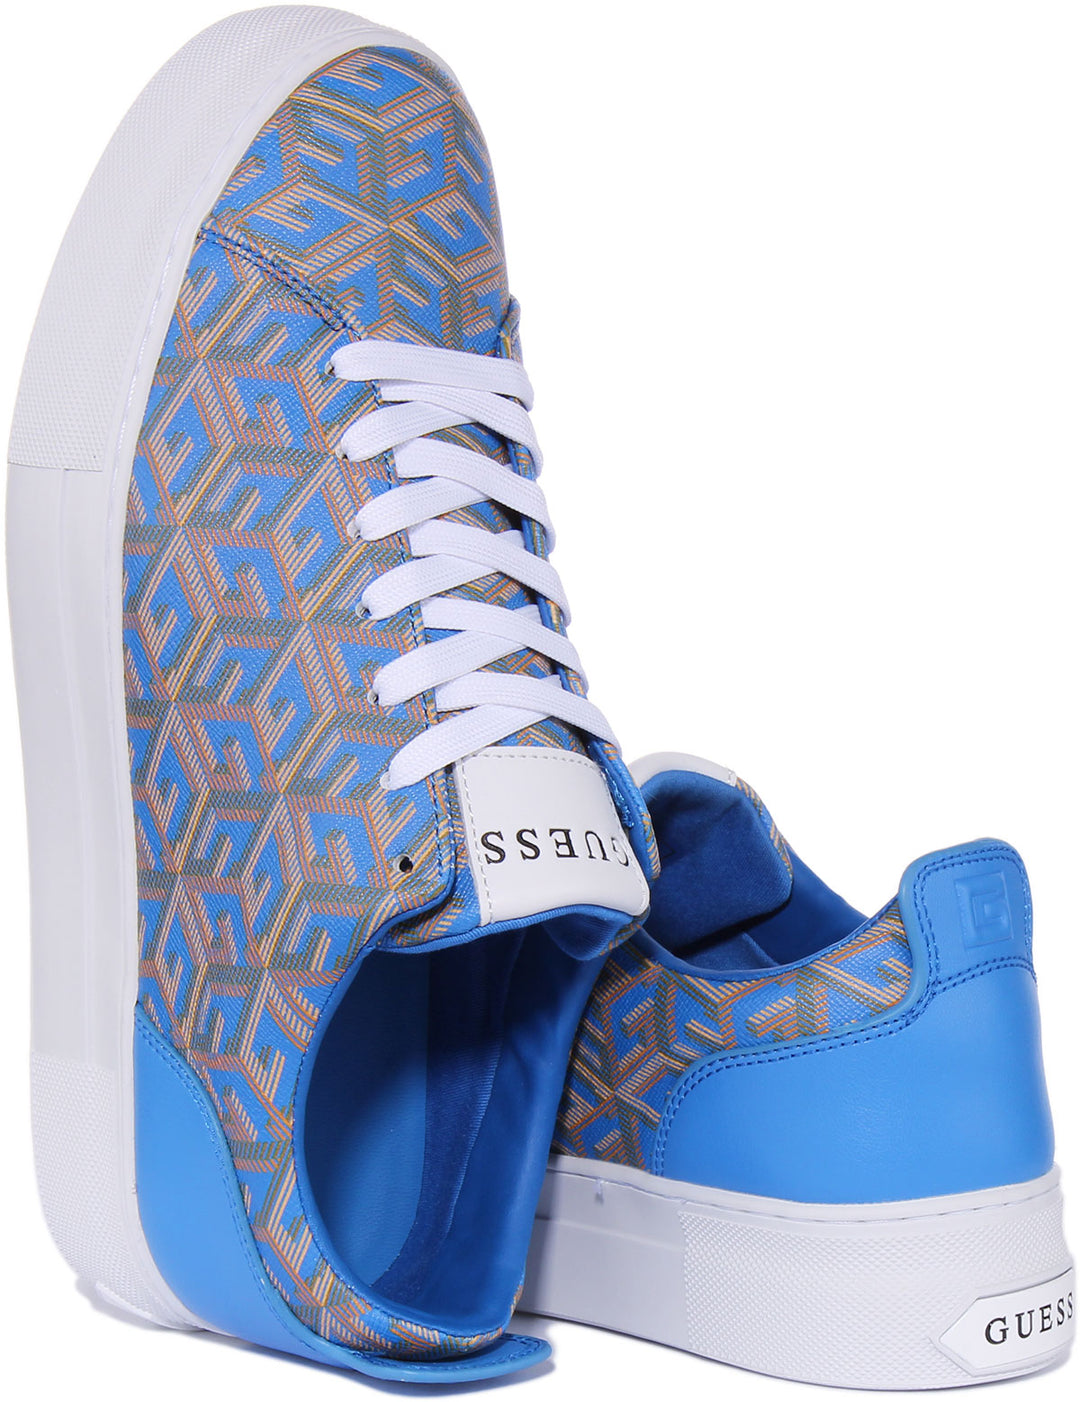 Guess Giaa G Cube Trainer In Blue For Women